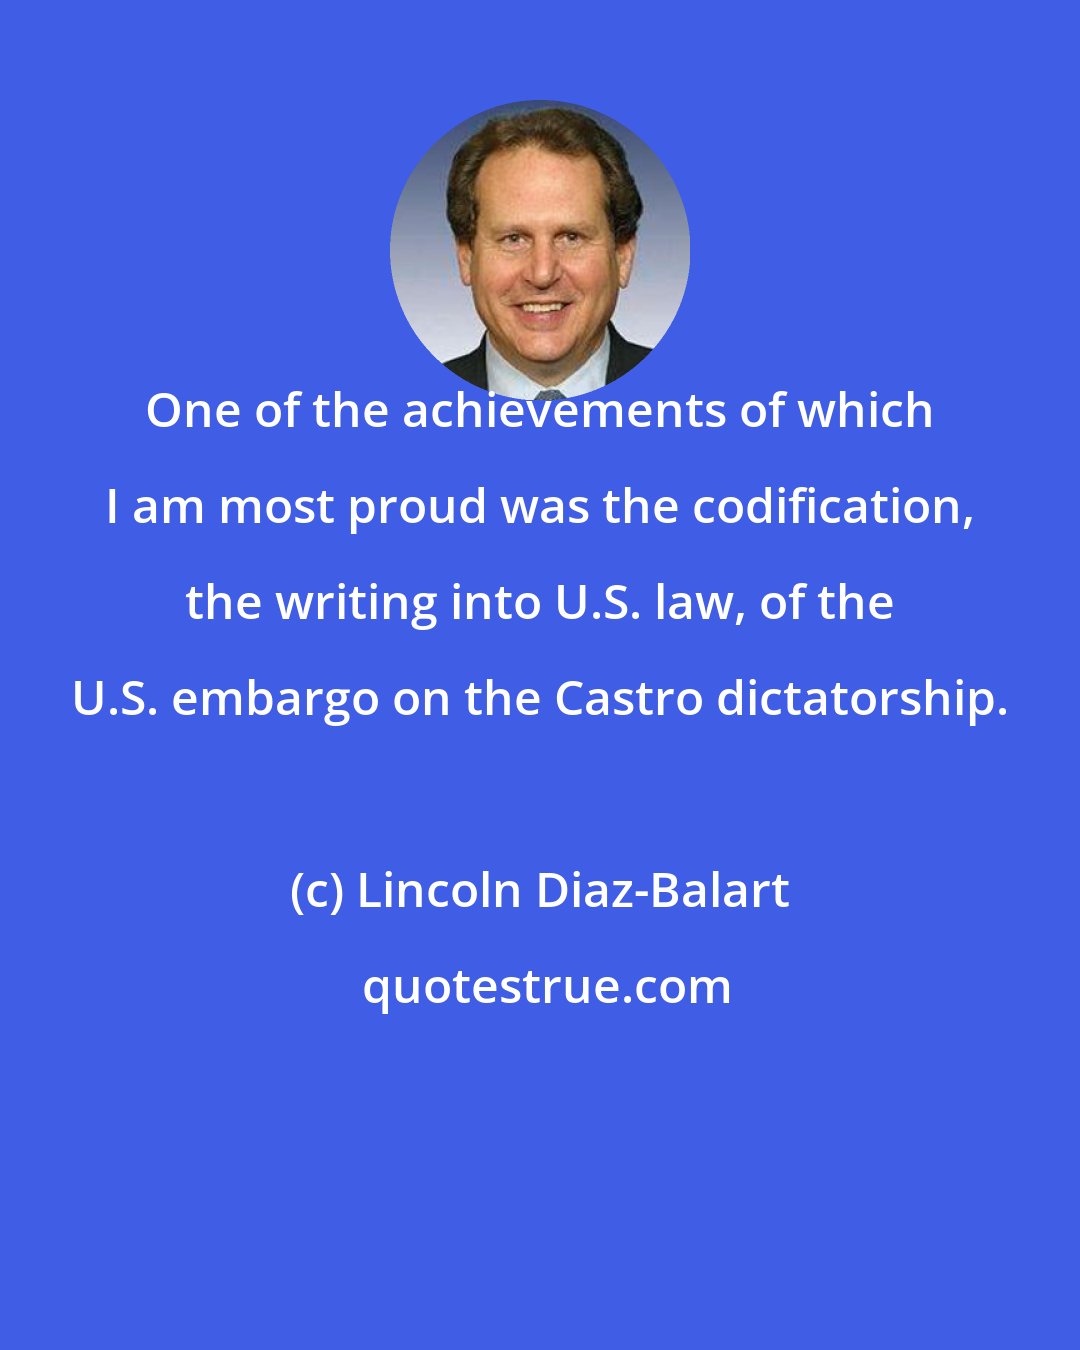 Lincoln Diaz-Balart: One of the achievements of which I am most proud was the codification, the writing into U.S. law, of the U.S. embargo on the Castro dictatorship.